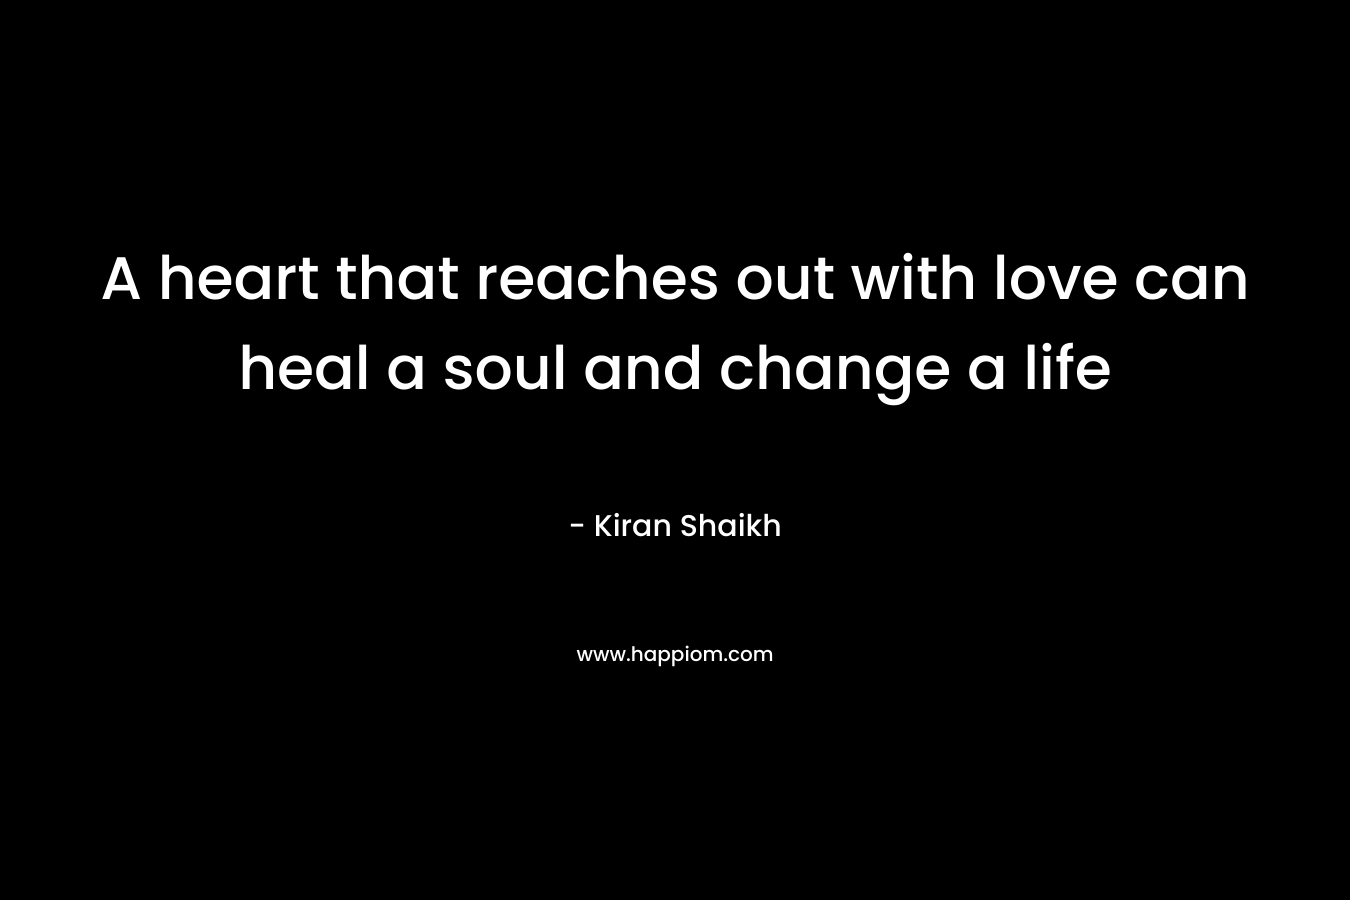 A heart that reaches out with love can heal a soul and change a life